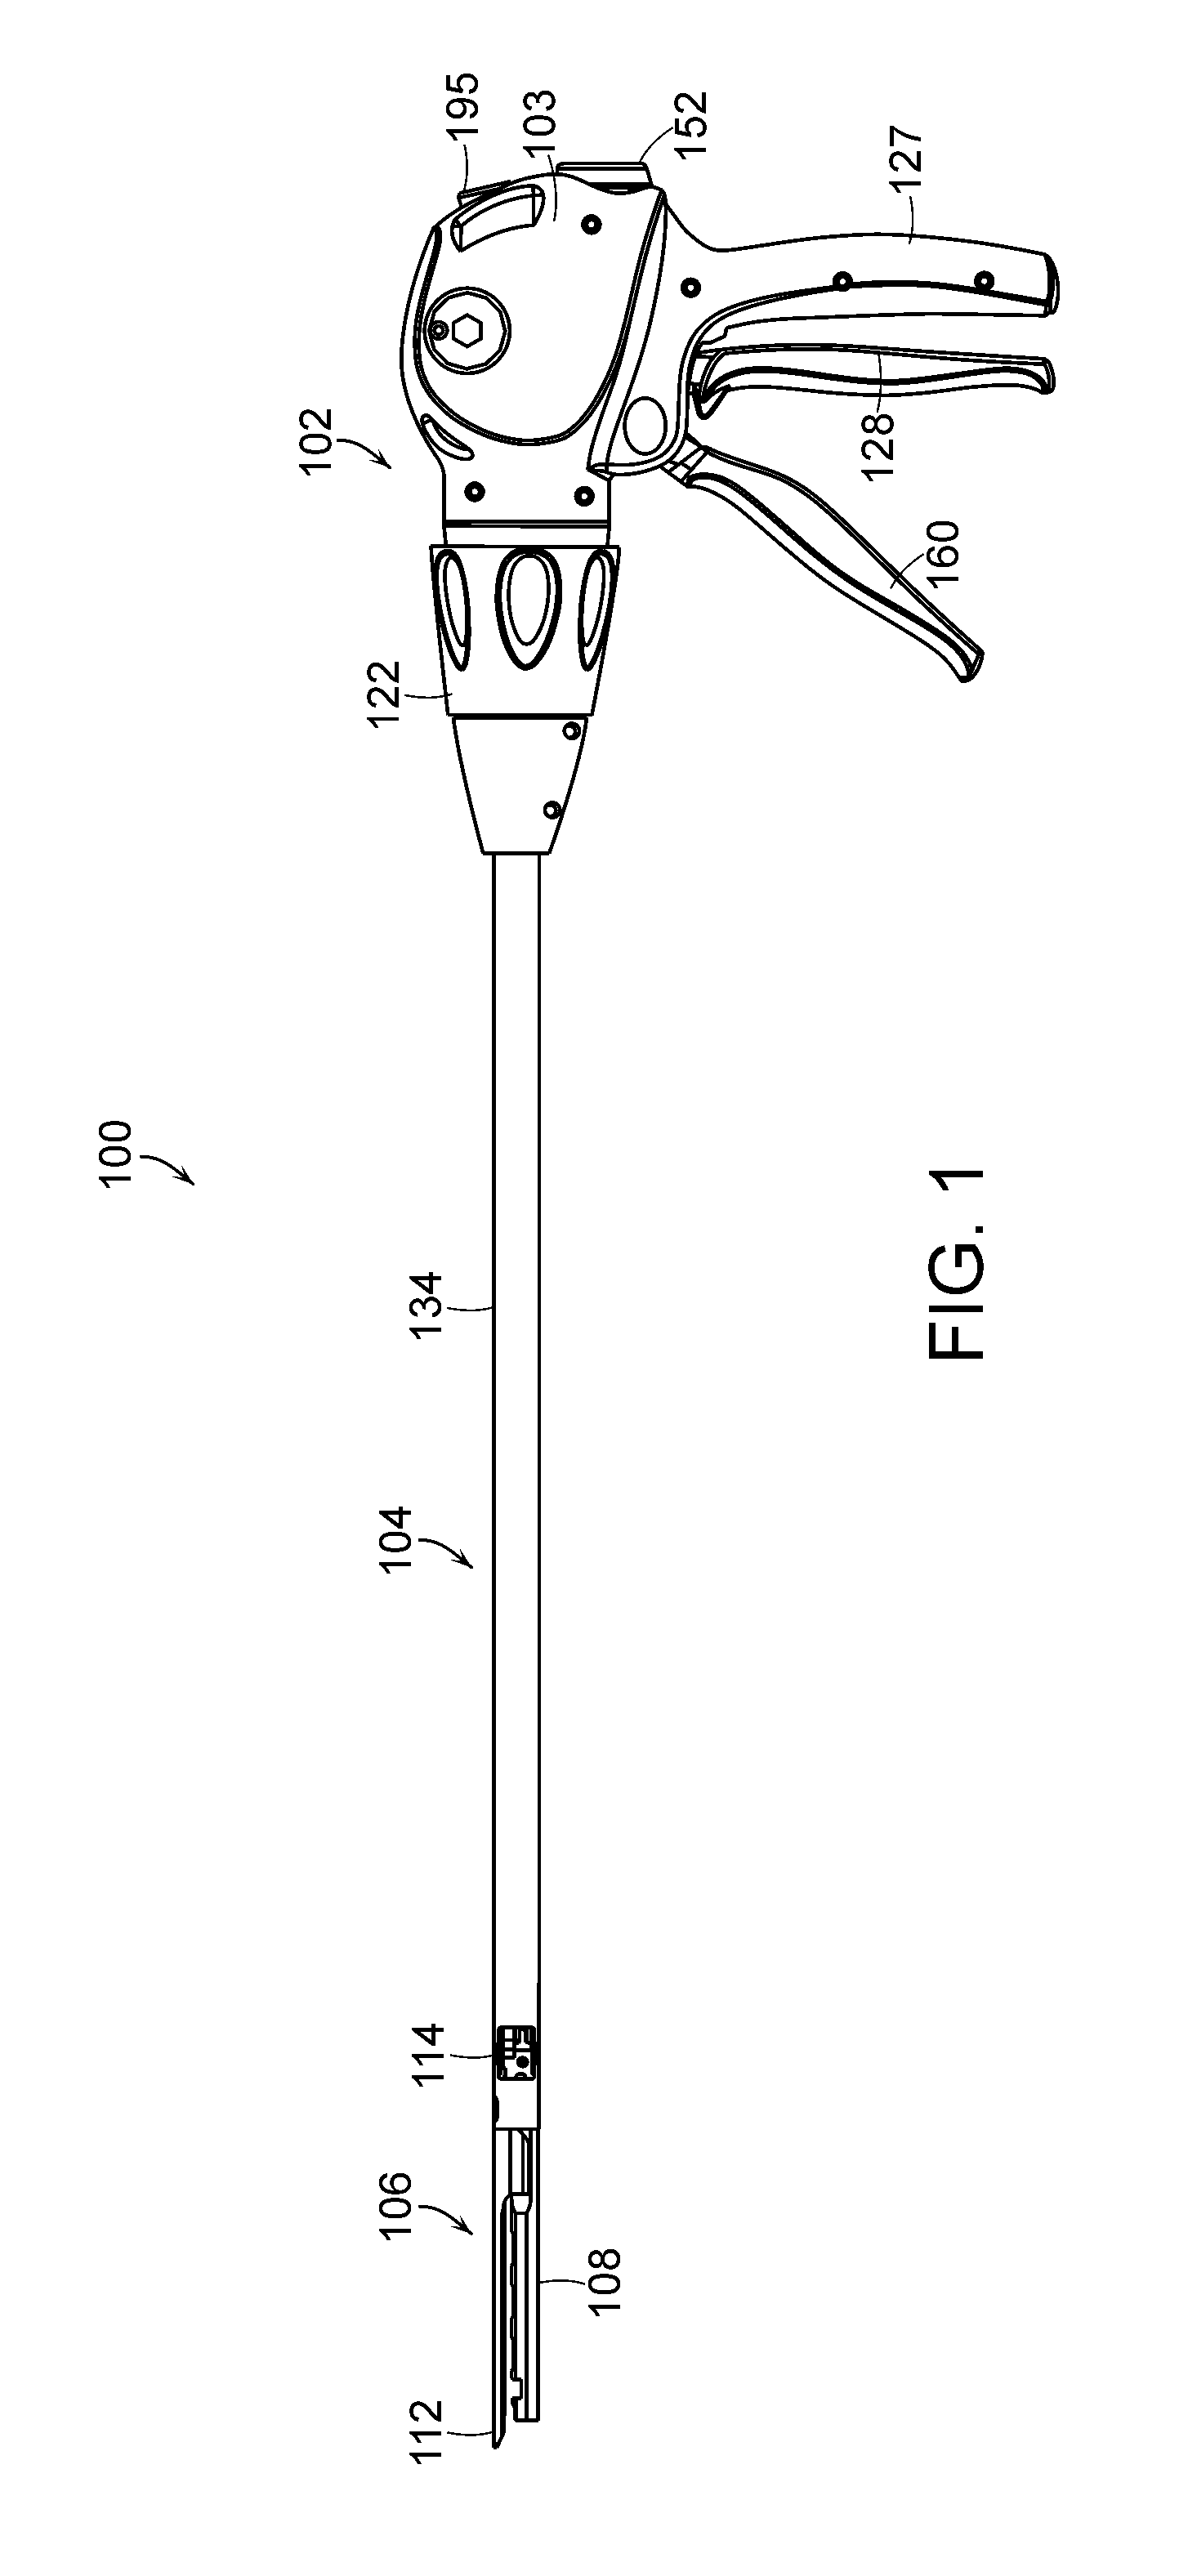 Surgical stapling instrument with an anti-back up mechanism